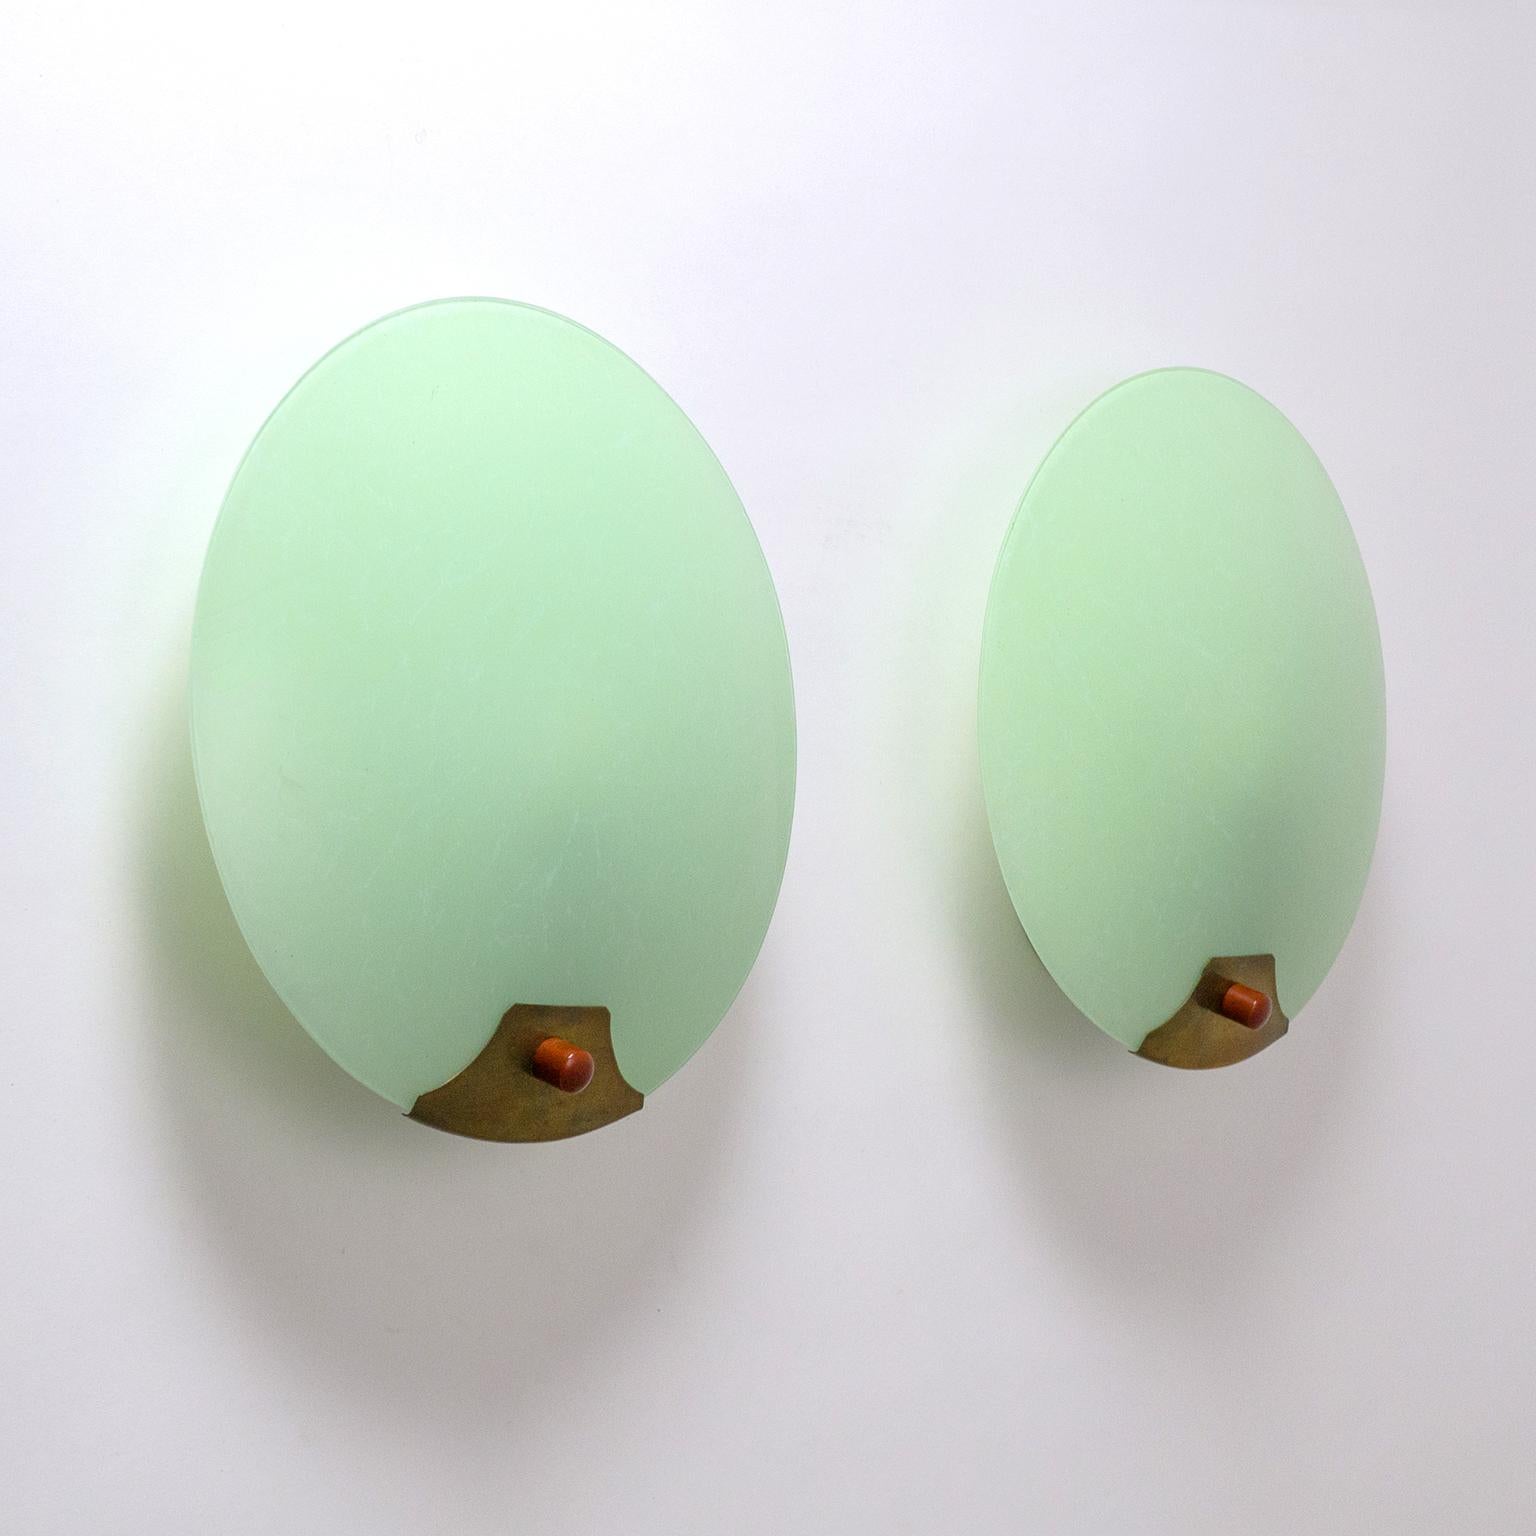 Very interesting pair of Art Deco wall lights, circa 1930. Slightly curved glass discs with a rear casing in mint with white streaks giving it a marbled effect. The glass is attached to the wall unit by a Bordeaux colored Bakelite knob with a pagoda